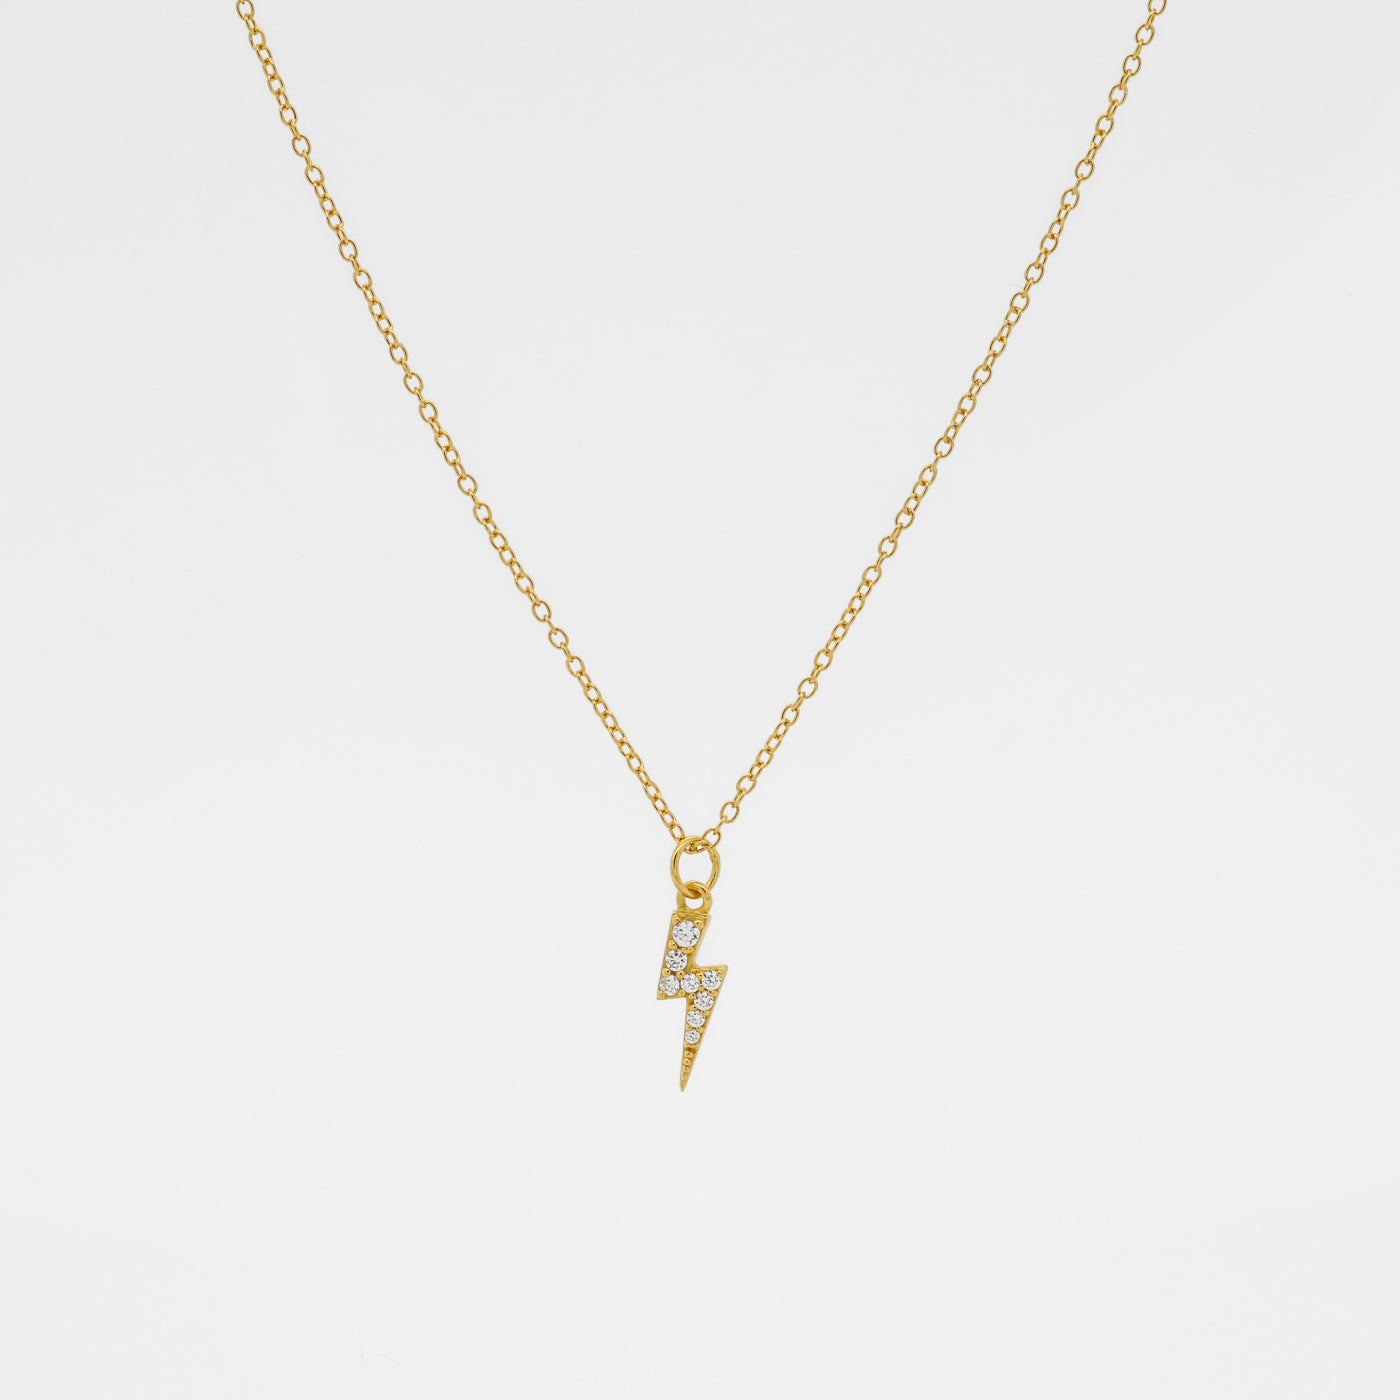 Stevie Small Bolt Necklace